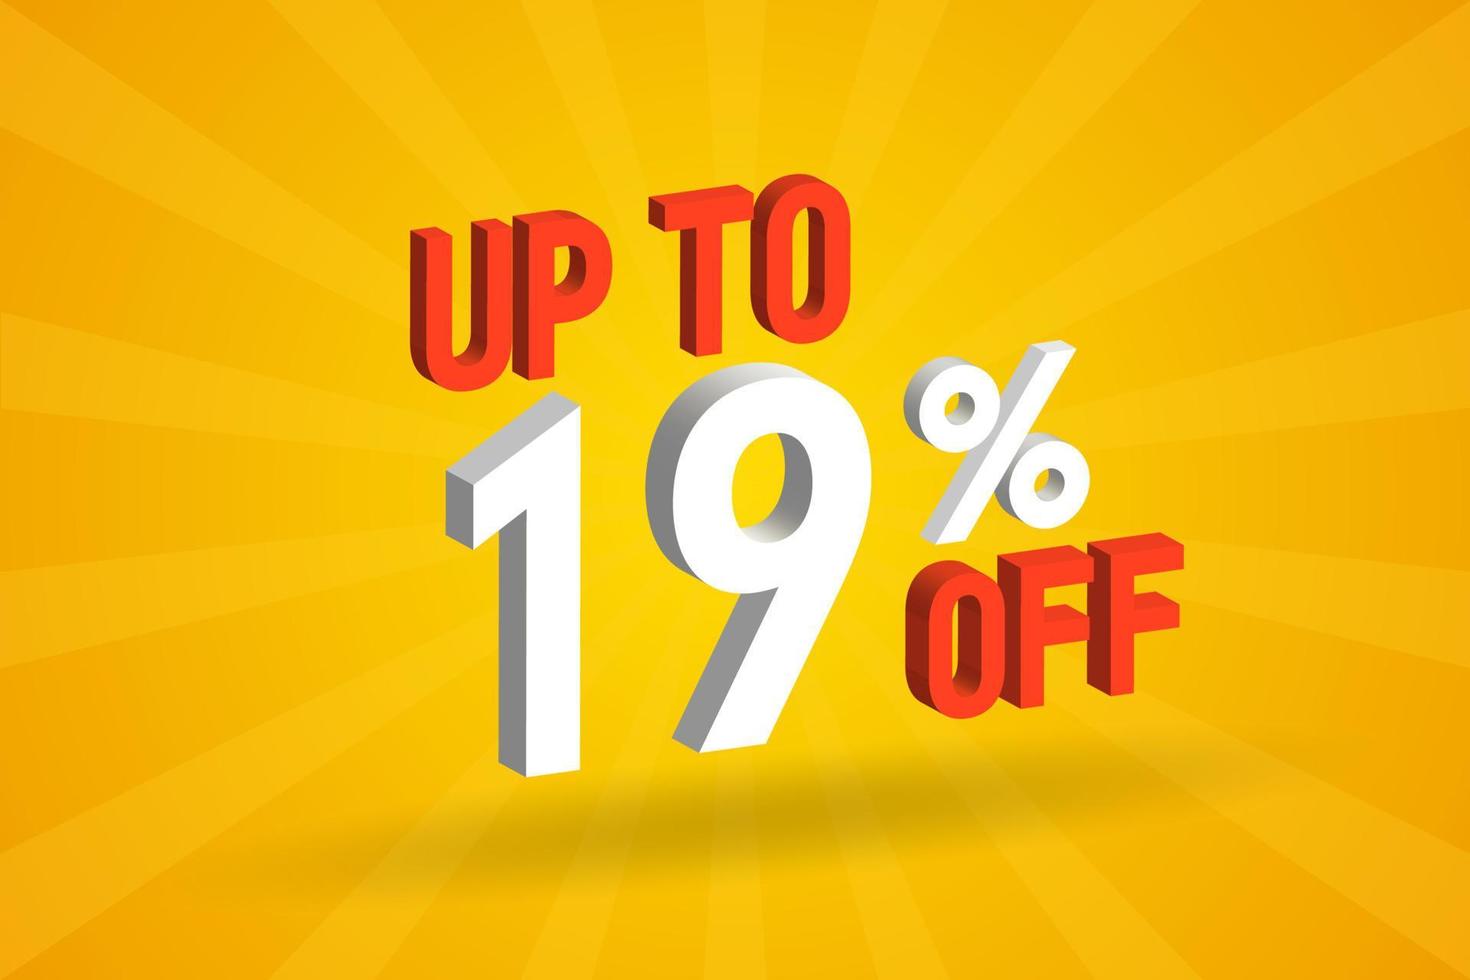 Up To 19 Percent off 3D Special promotional campaign design. Upto 19 of 3D Discount Offer for Sale and marketing. vector